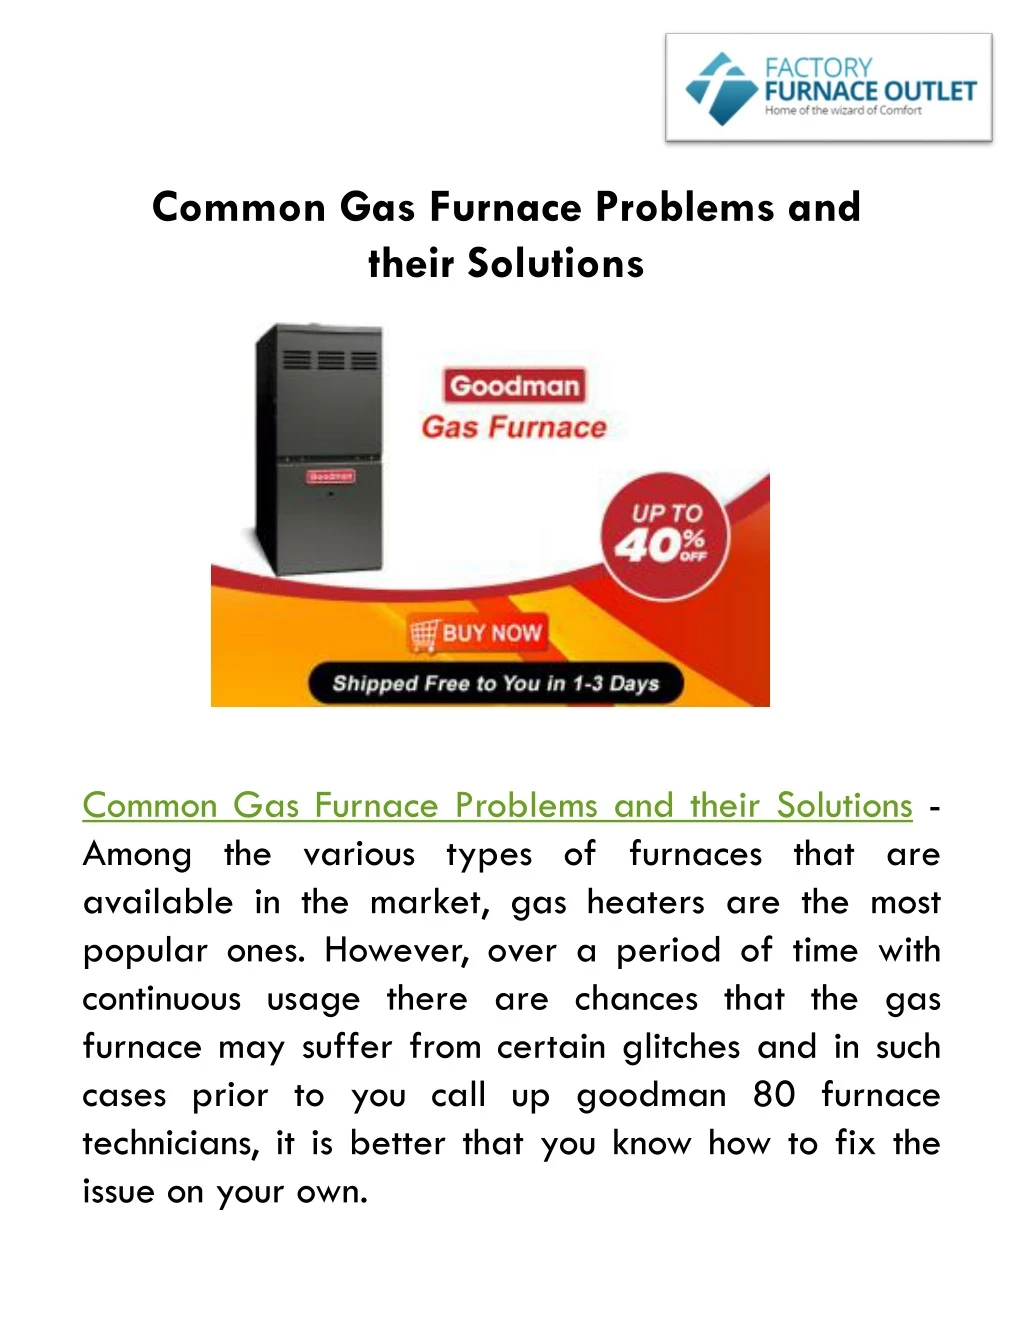 common gas furnace problems and their solutions